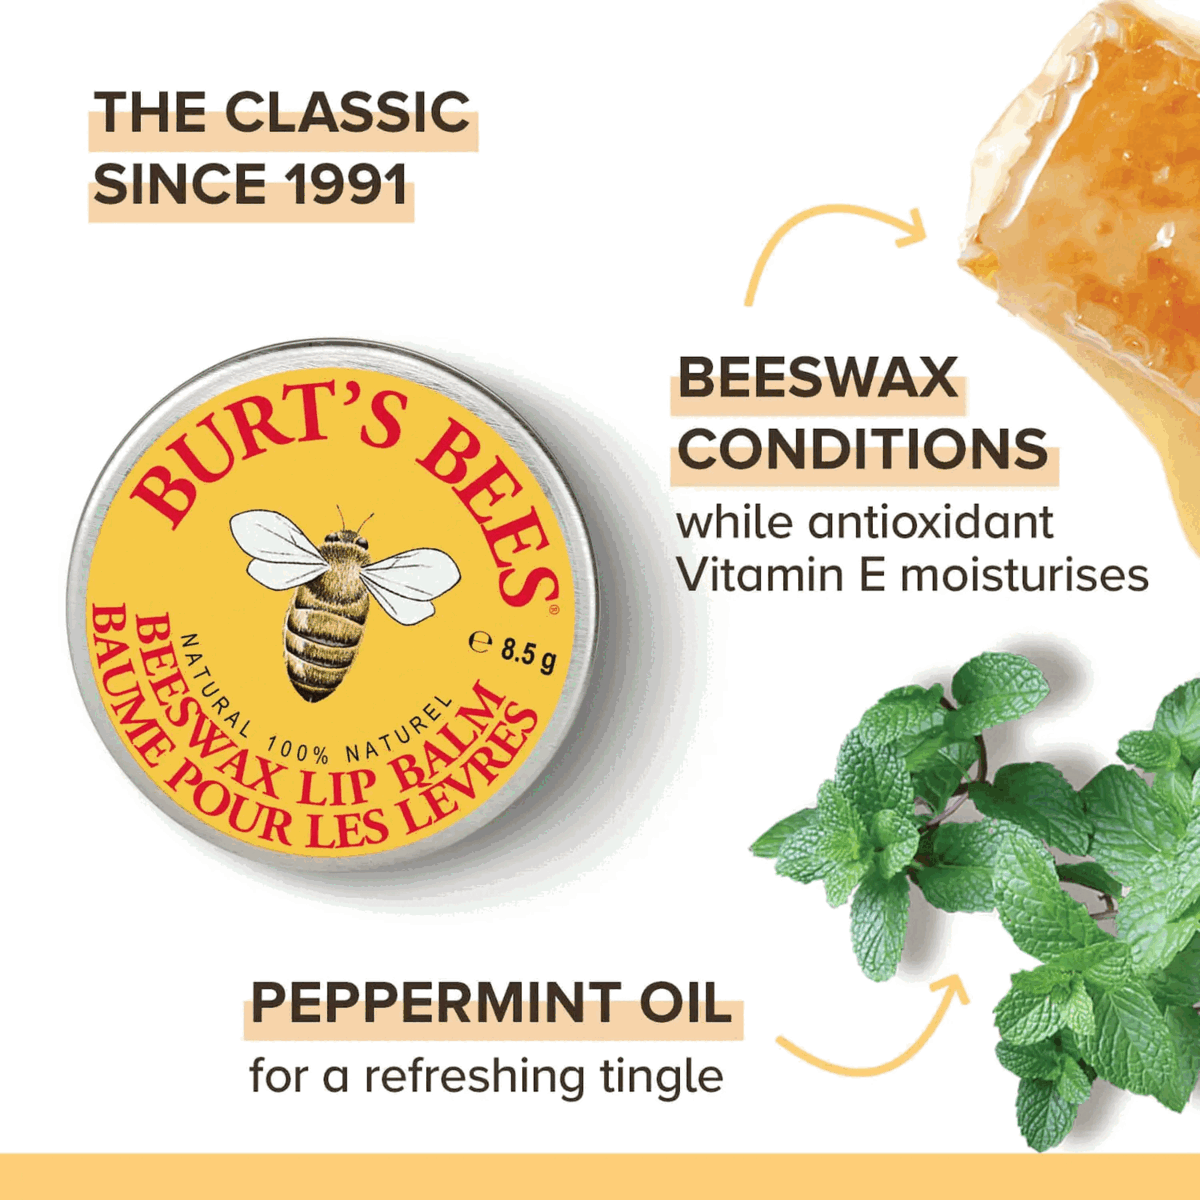 THE CLASSIC SINCE 1991 
            BEESWAX CONDITIONS while antioxidant Vitamin E moisturises 
            PEPPERMINT OIL for a refreshing tingle ,
            KIND TO SKIN & PLANET SINCE 1984 
            Ingredients From Nature 
            Leaping Bunny Certified 
            Landfill-free Operations 
            oiA 
            Responsible Sourcing 
            Recyclable Packaging 
            c.,401p,00 CAPRI CarbonNeutral® NEUTRAL® Certified c°,71 p a<\'i
            